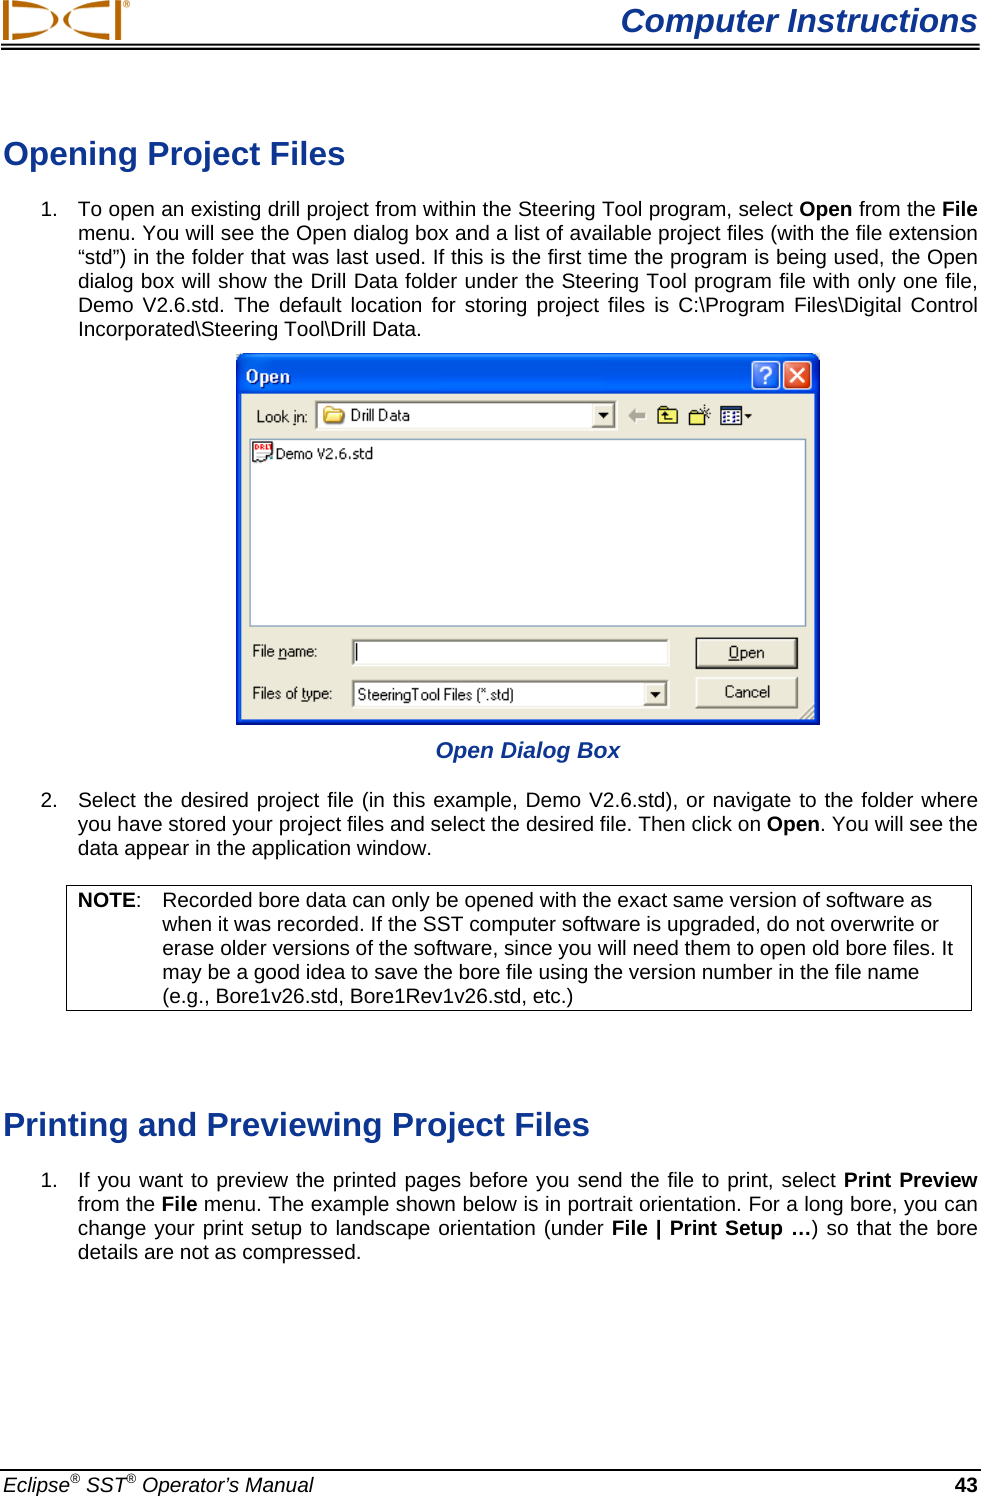  Computer Instructions Opening Project Files  1.  To open an existing drill project from within the Steering Tool program, select Open from the File menu. You will see the Open dialog box and a list of available project files (with the file extension “std”) in the folder that was last used. If this is the first time the program is being used, the Open dialog box will show the Drill Data folder under the Steering Tool program file with only one file, Demo V2.6.std. The default location for storing project files is C:\Program Files\Digital Control Incorporated\Steering Tool\Drill Data.   Open Dialog Box 2.  Select the desired project file (in this example, Demo V2.6.std), or navigate to the folder where you have stored your project files and select the desired file. Then click on Open. You will see the data appear in the application window.  NOTE:  Recorded bore data can only be opened with the exact same version of software as when it was recorded. If the SST computer software is upgraded, do not overwrite or erase older versions of the software, since you will need them to open old bore files. It may be a good idea to save the bore file using the version number in the file name (e.g., Bore1v26.std, Bore1Rev1v26.std, etc.)    Printing and Previewing Project Files 1.  If you want to preview the printed pages before you send the file to print, select Print Preview from the File menu. The example shown below is in portrait orientation. For a long bore, you can change your print setup to landscape orientation (under File | Print Setup …) so that the bore details are not as compressed.  Eclipse® SST® Operator’s Manual  43 